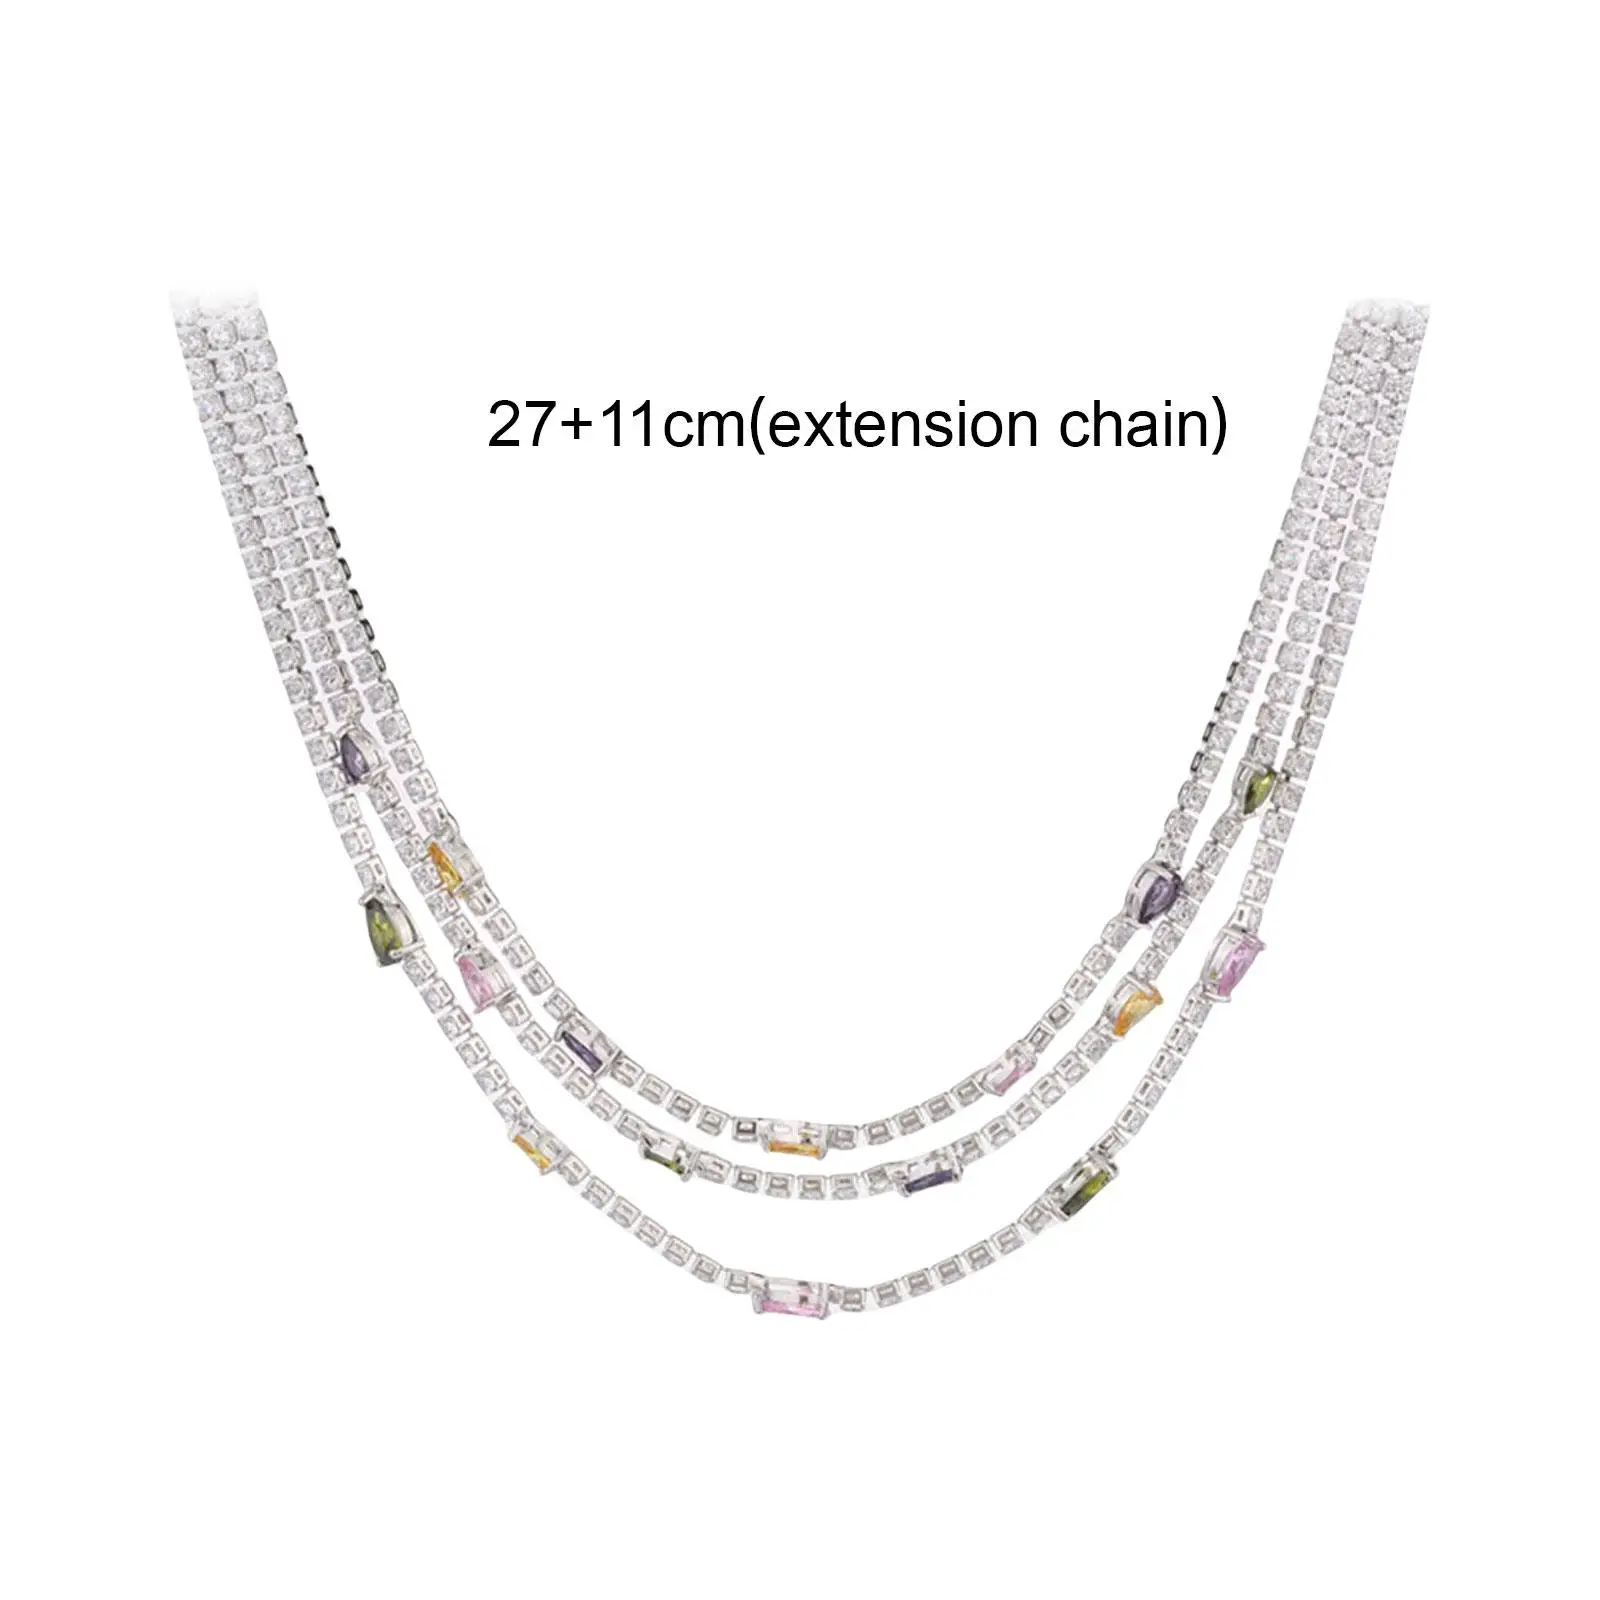 

Ornate Necklace Gifts Stylish Colorful Statement Pendant Necklace Charms Multilayer Women for Dating Party Wedding Anniversary